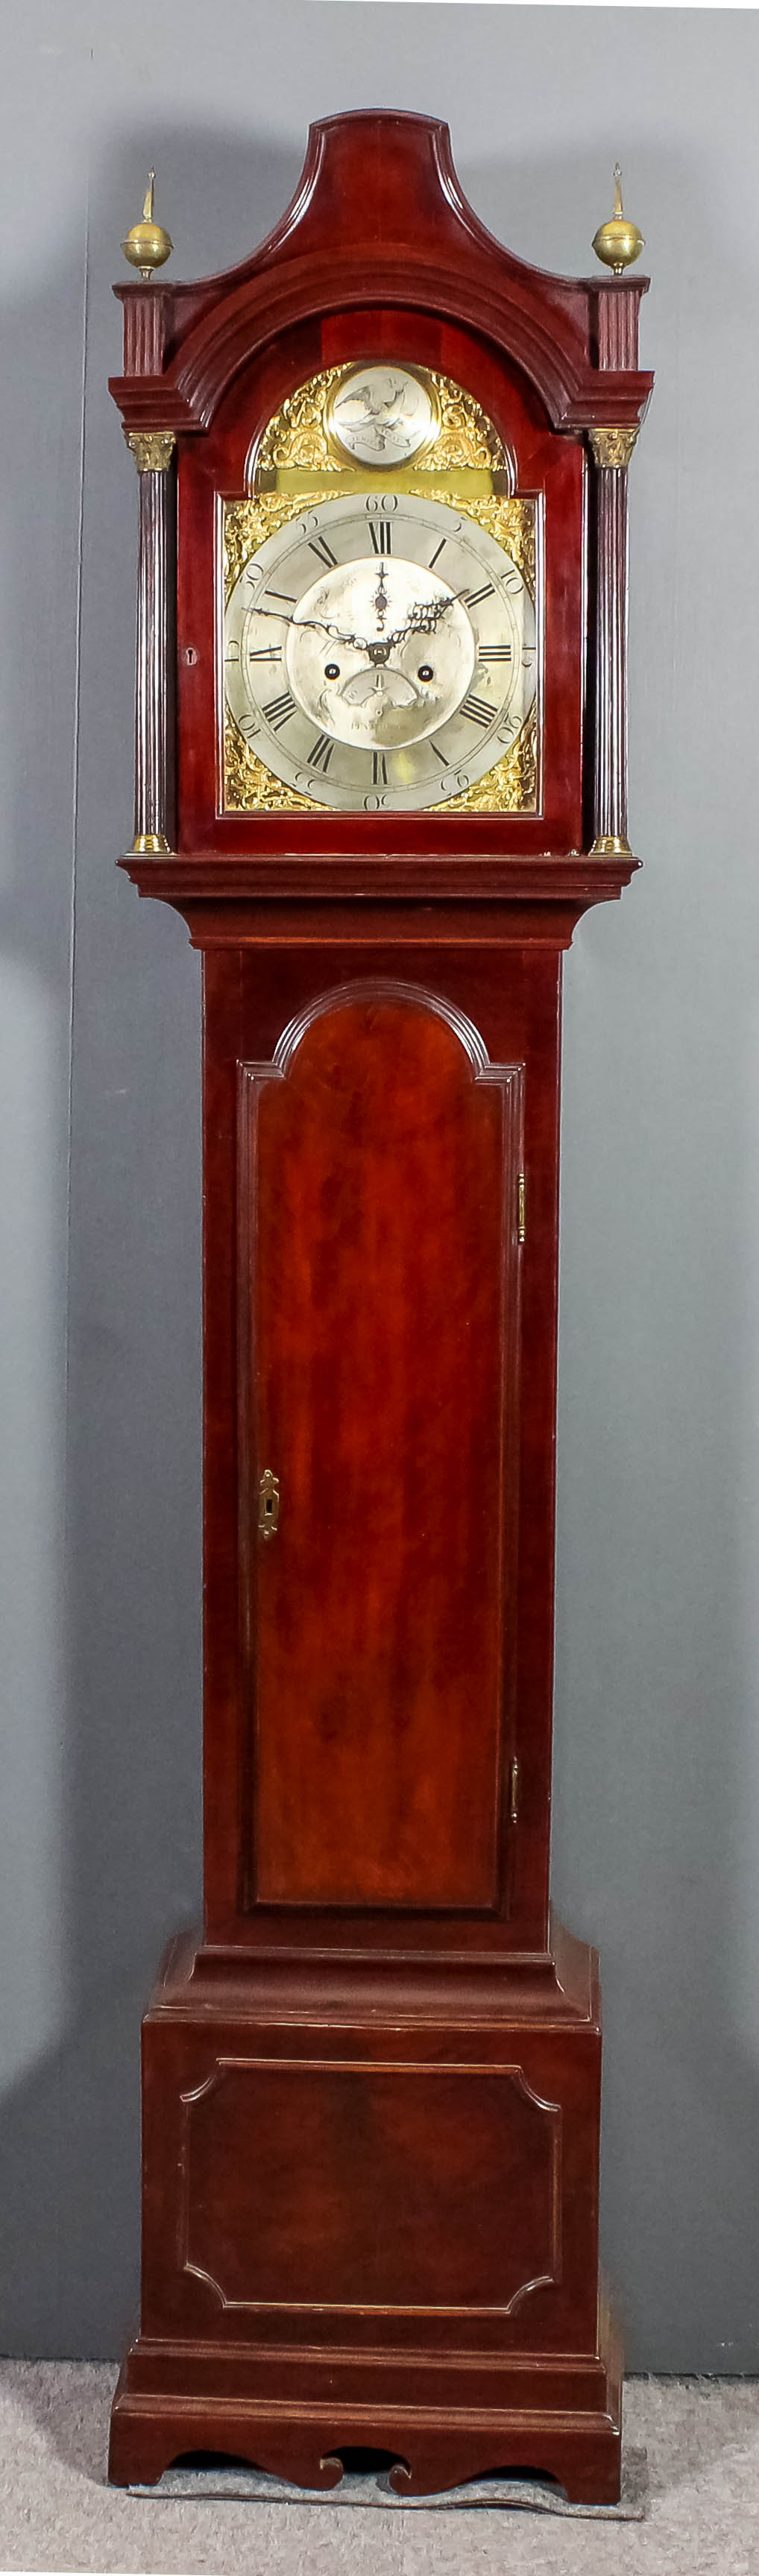 A George III mahogany longcase clock by William Copelstone of Plymouth Dock, the 12ins arched